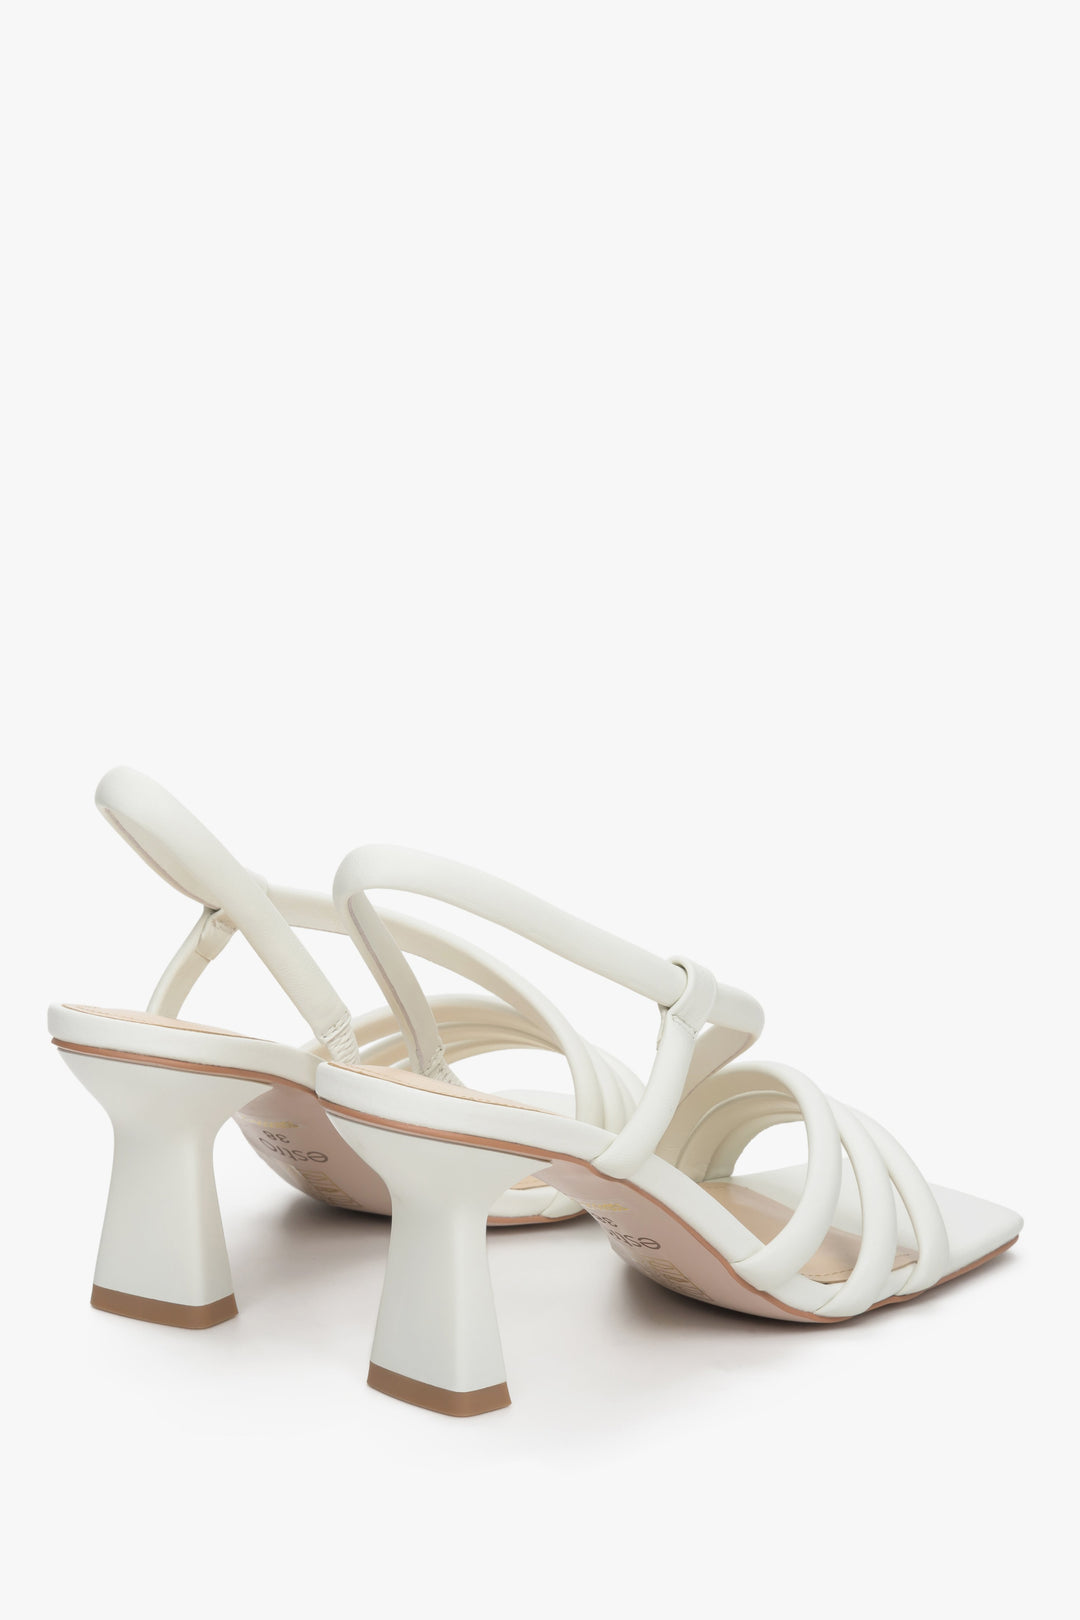 Women's light beige strappy sandals made of natural leather - a close-up on heel and shoe sideline.